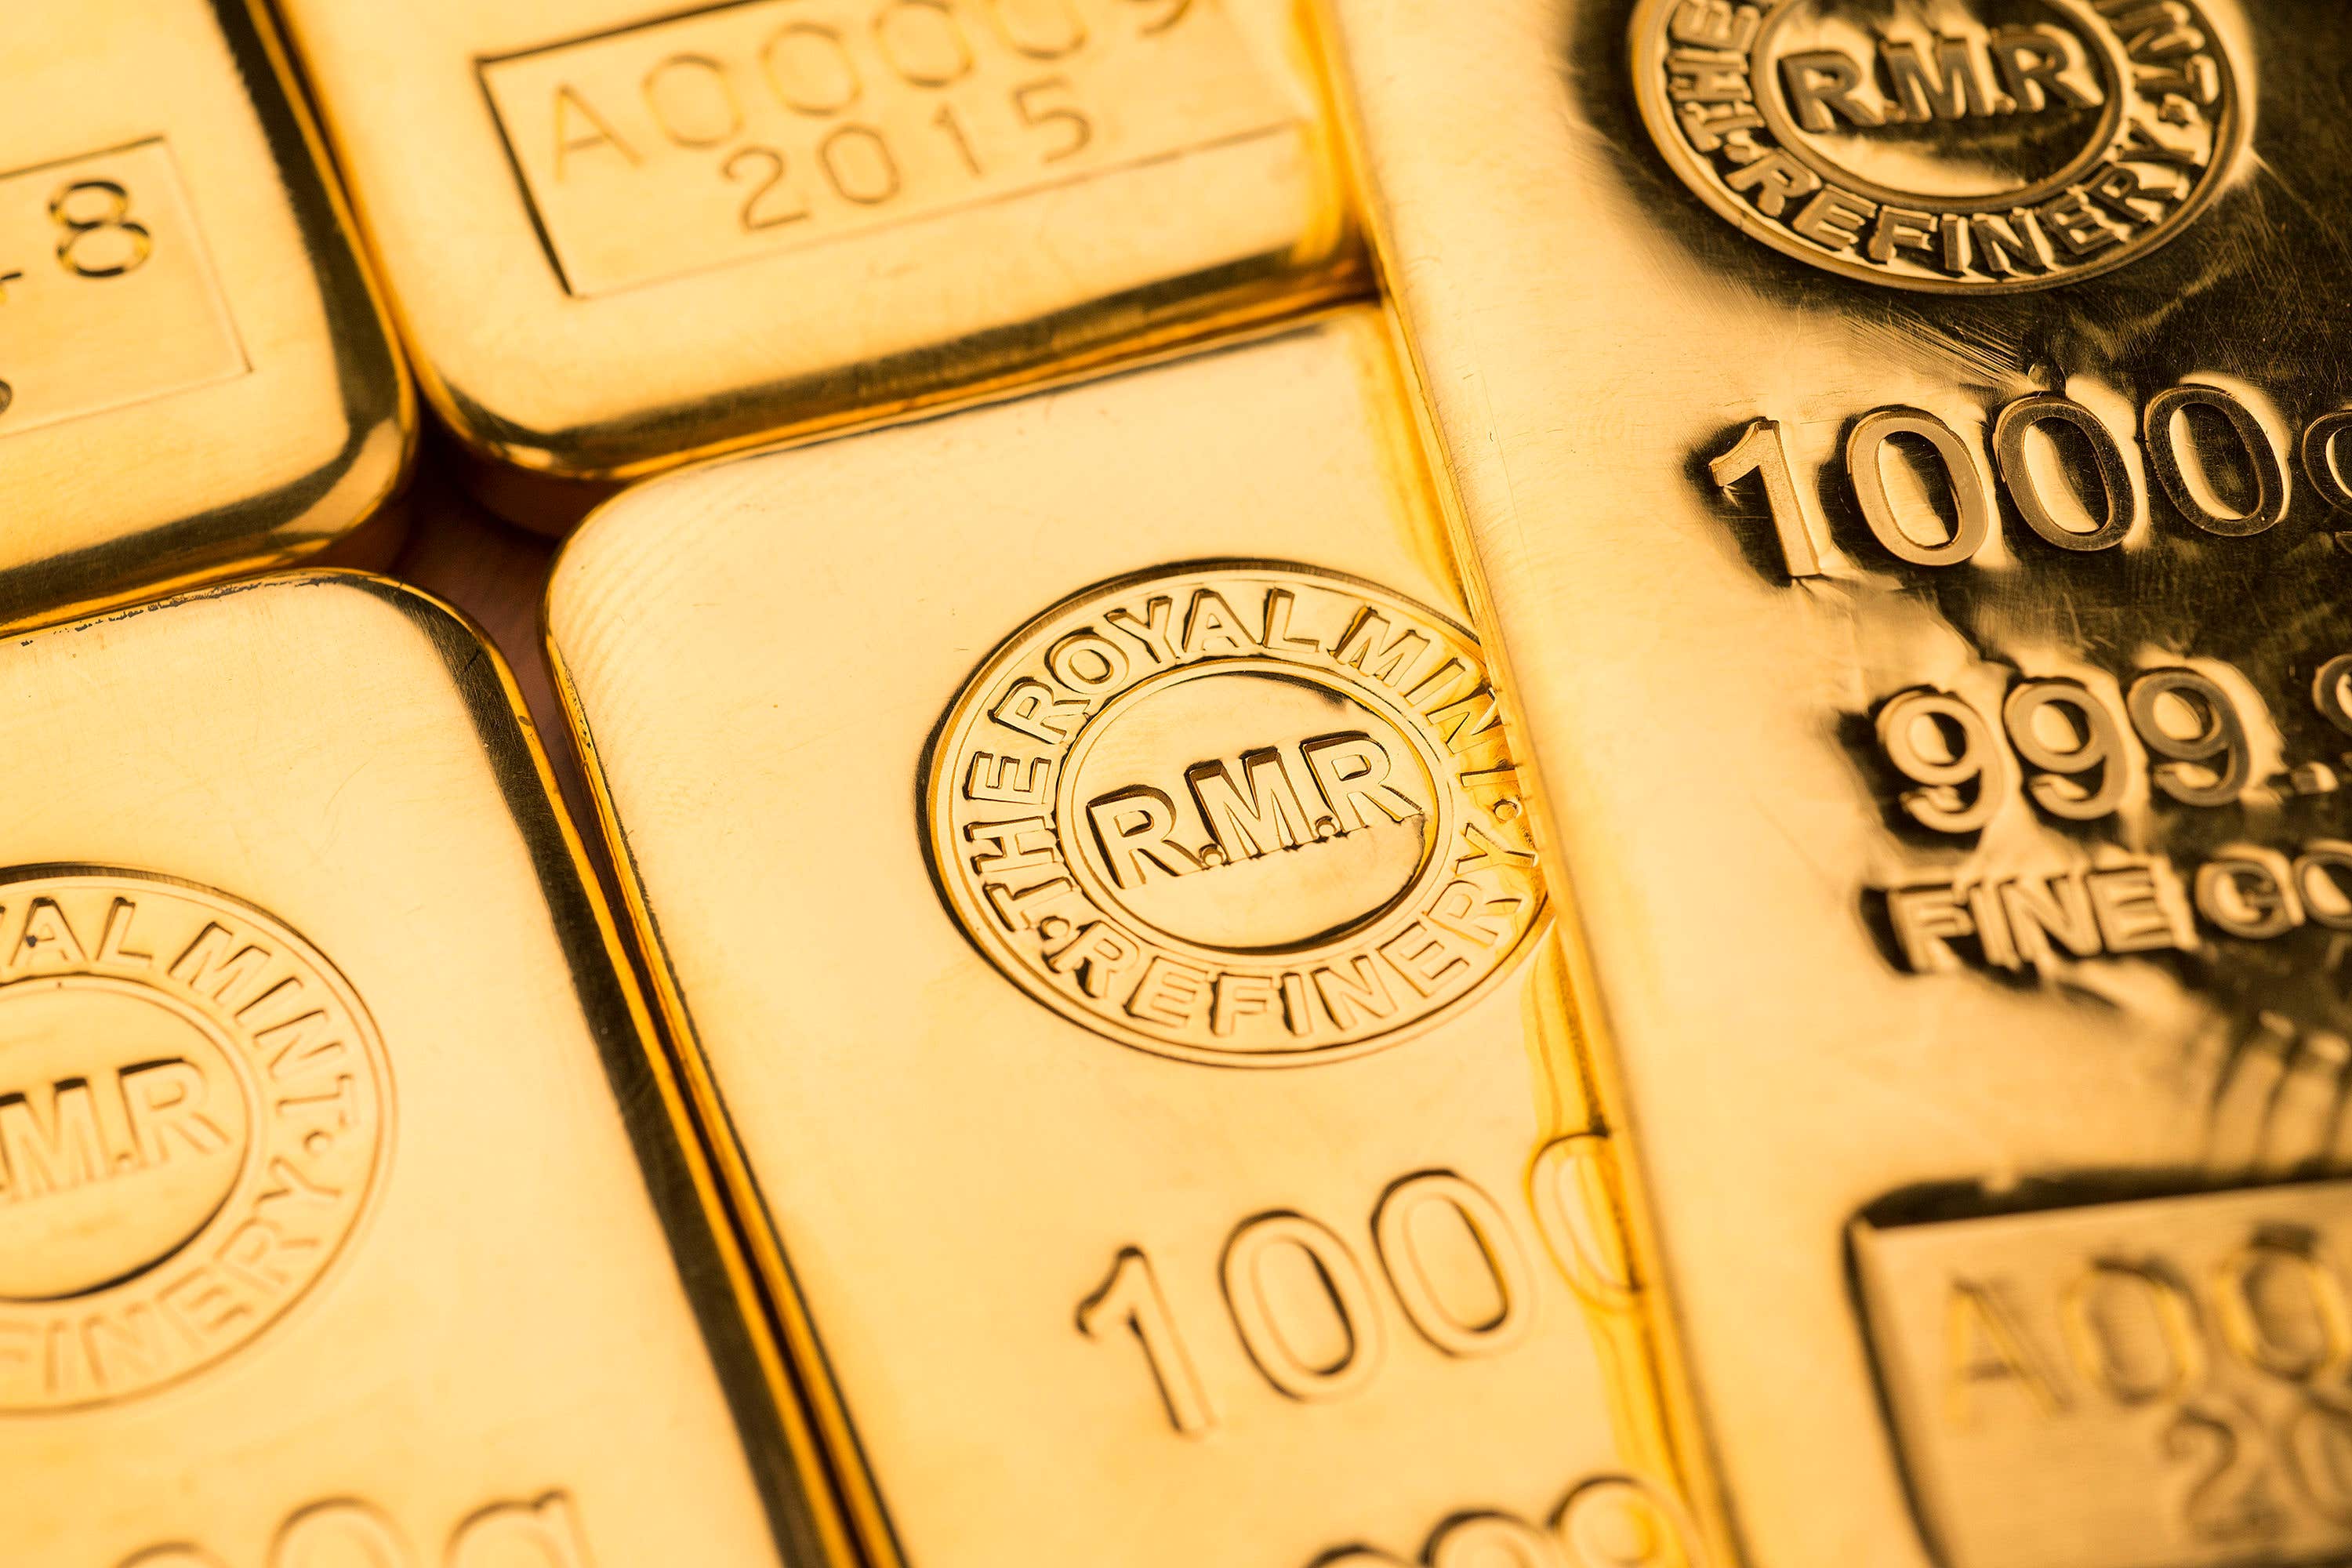 The Royal Mint has raked in more than £1.2 billion in sales of precious metals as investors turn to gold amid turbulent financial markets (The Royal Mint/ PA)